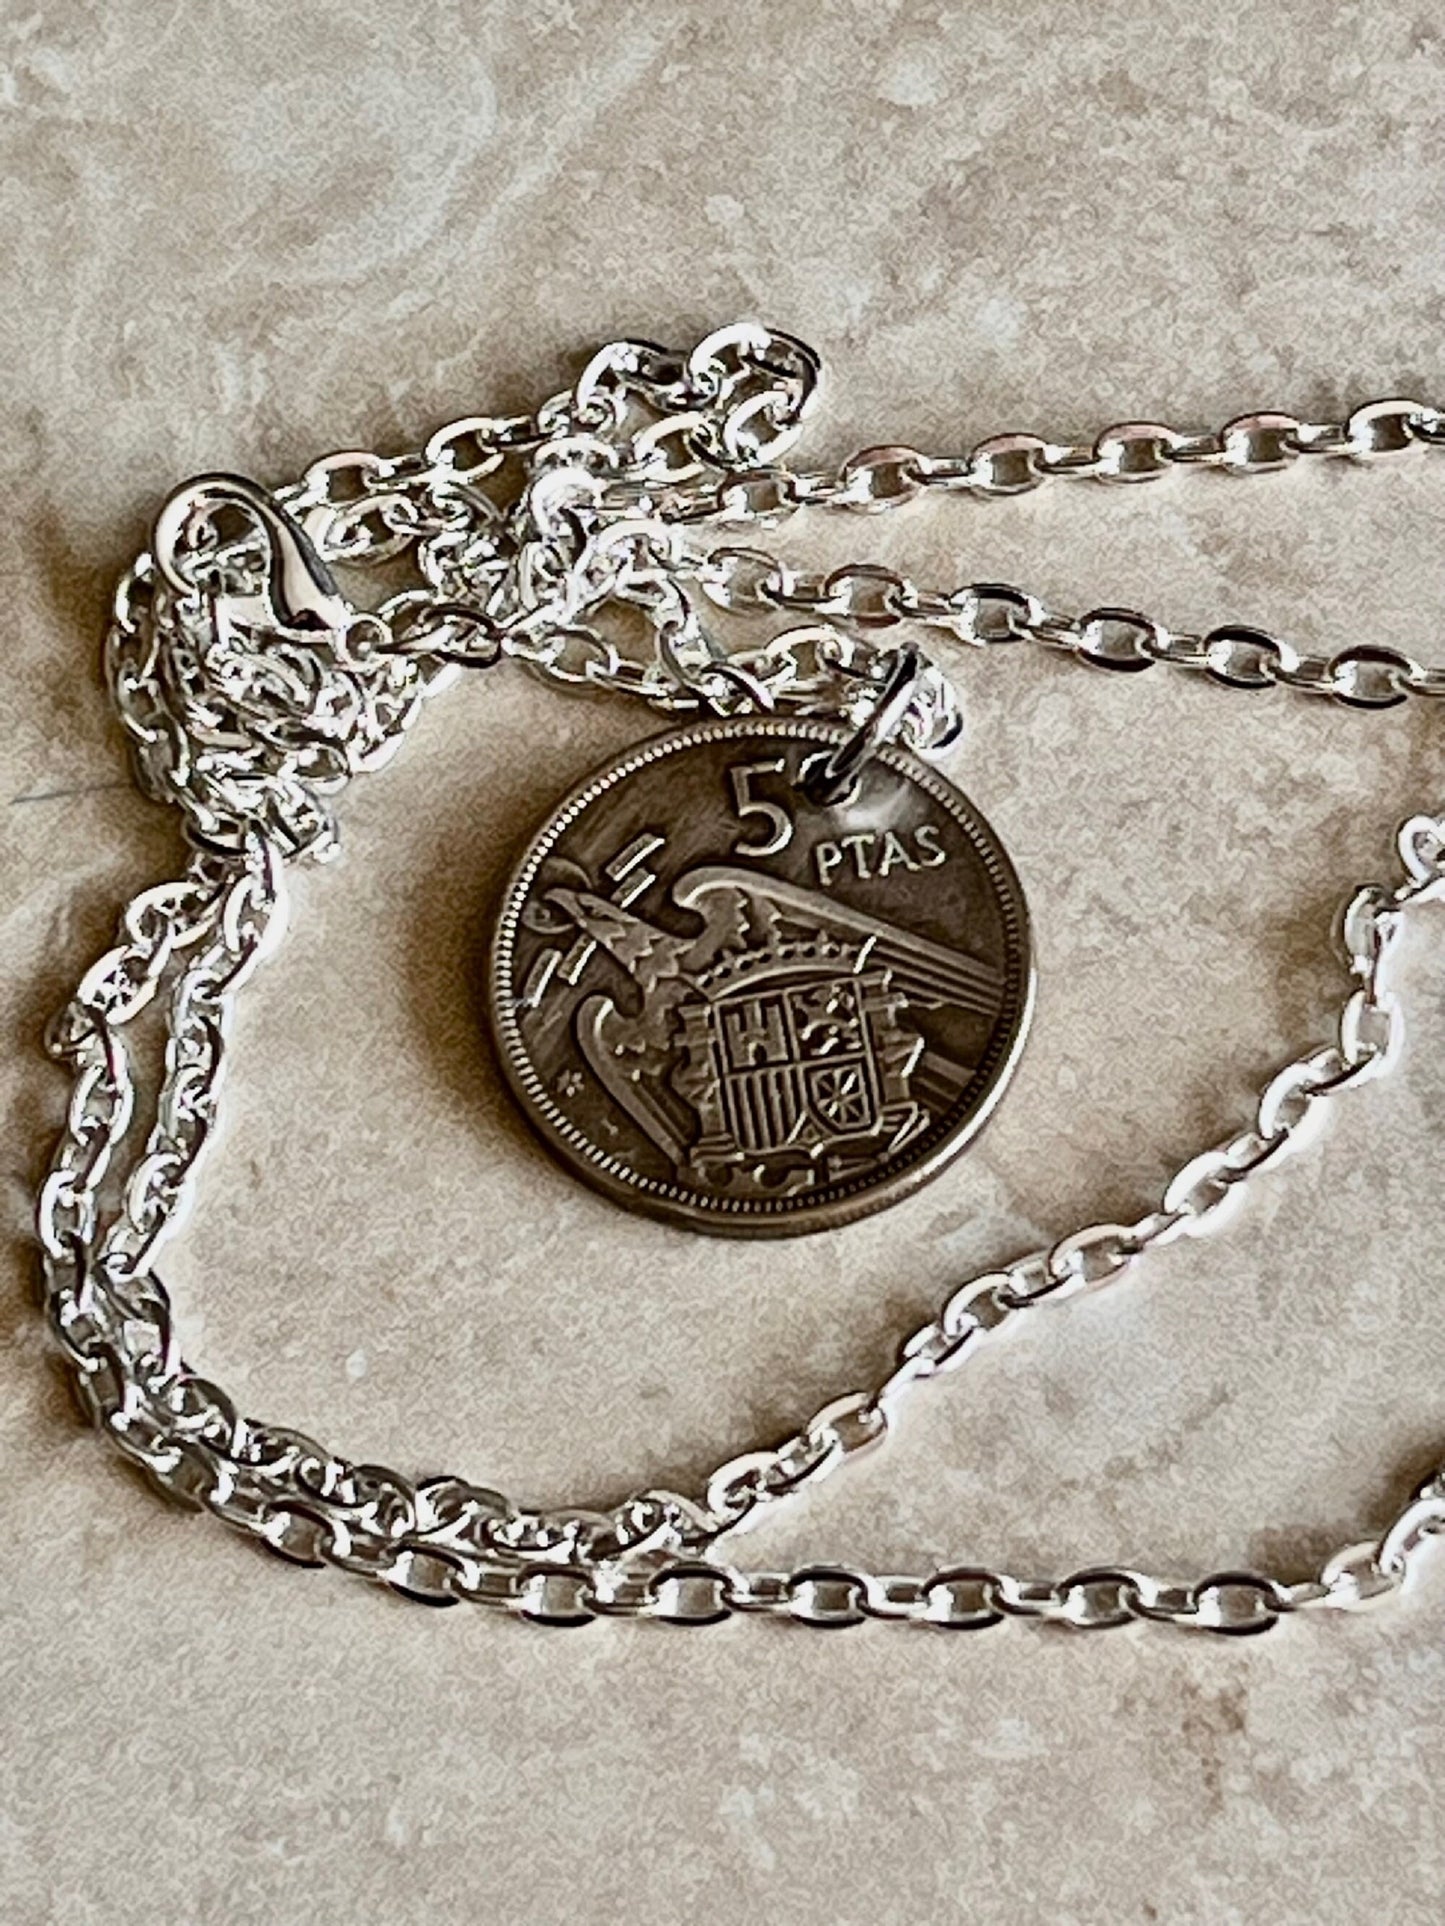 Spain Coin Pendant Spanish 5 Ptas 1957 Necklace Handmade Jewelry Gift For Friend Coin Charm Gift For Him, Her, World Coins Collector